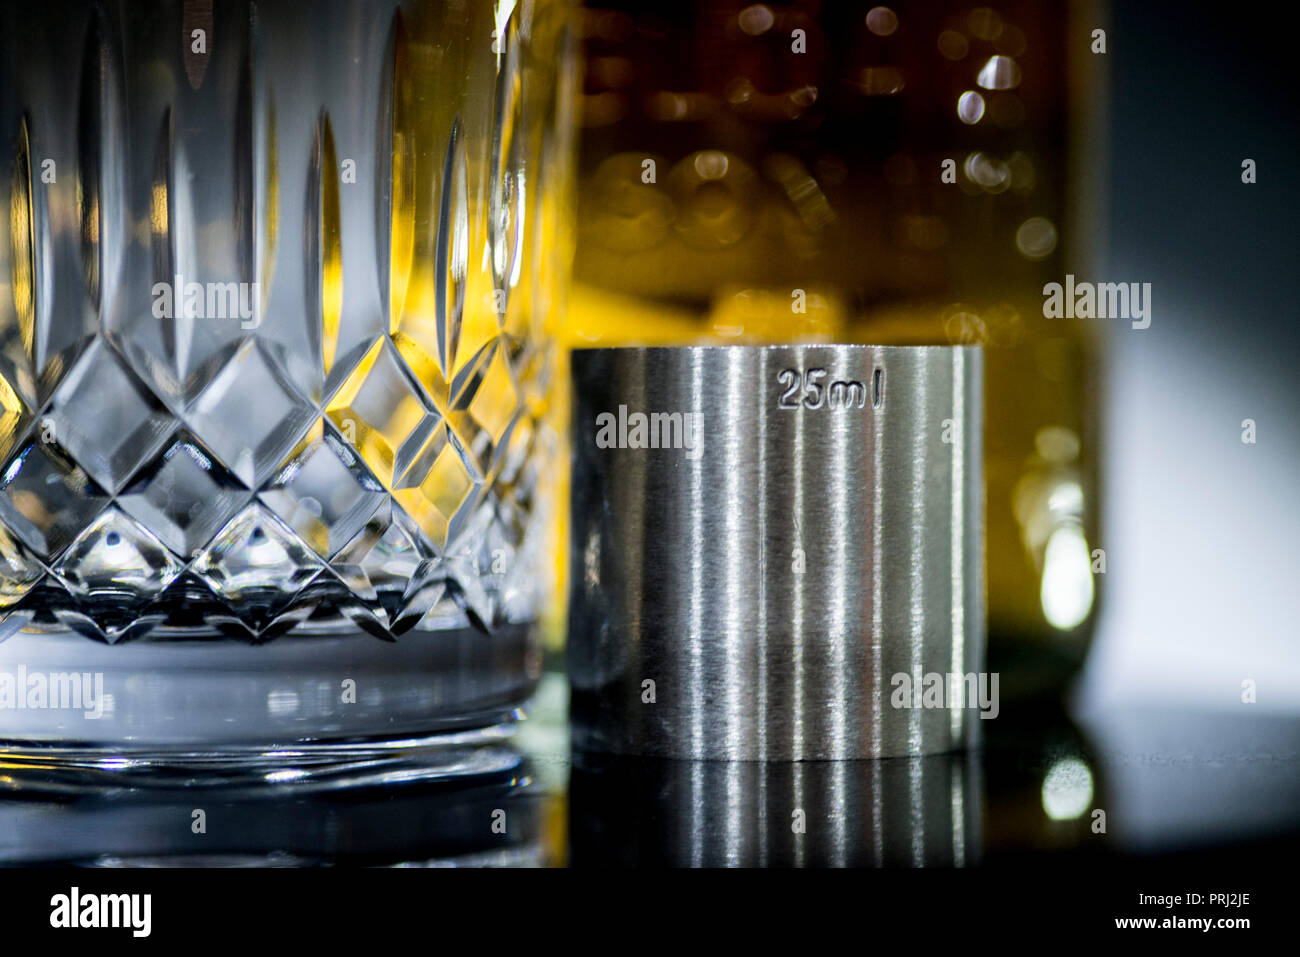 Whisky glass and spirit measure with out of focus whisky bottle in the background. Stock Photo